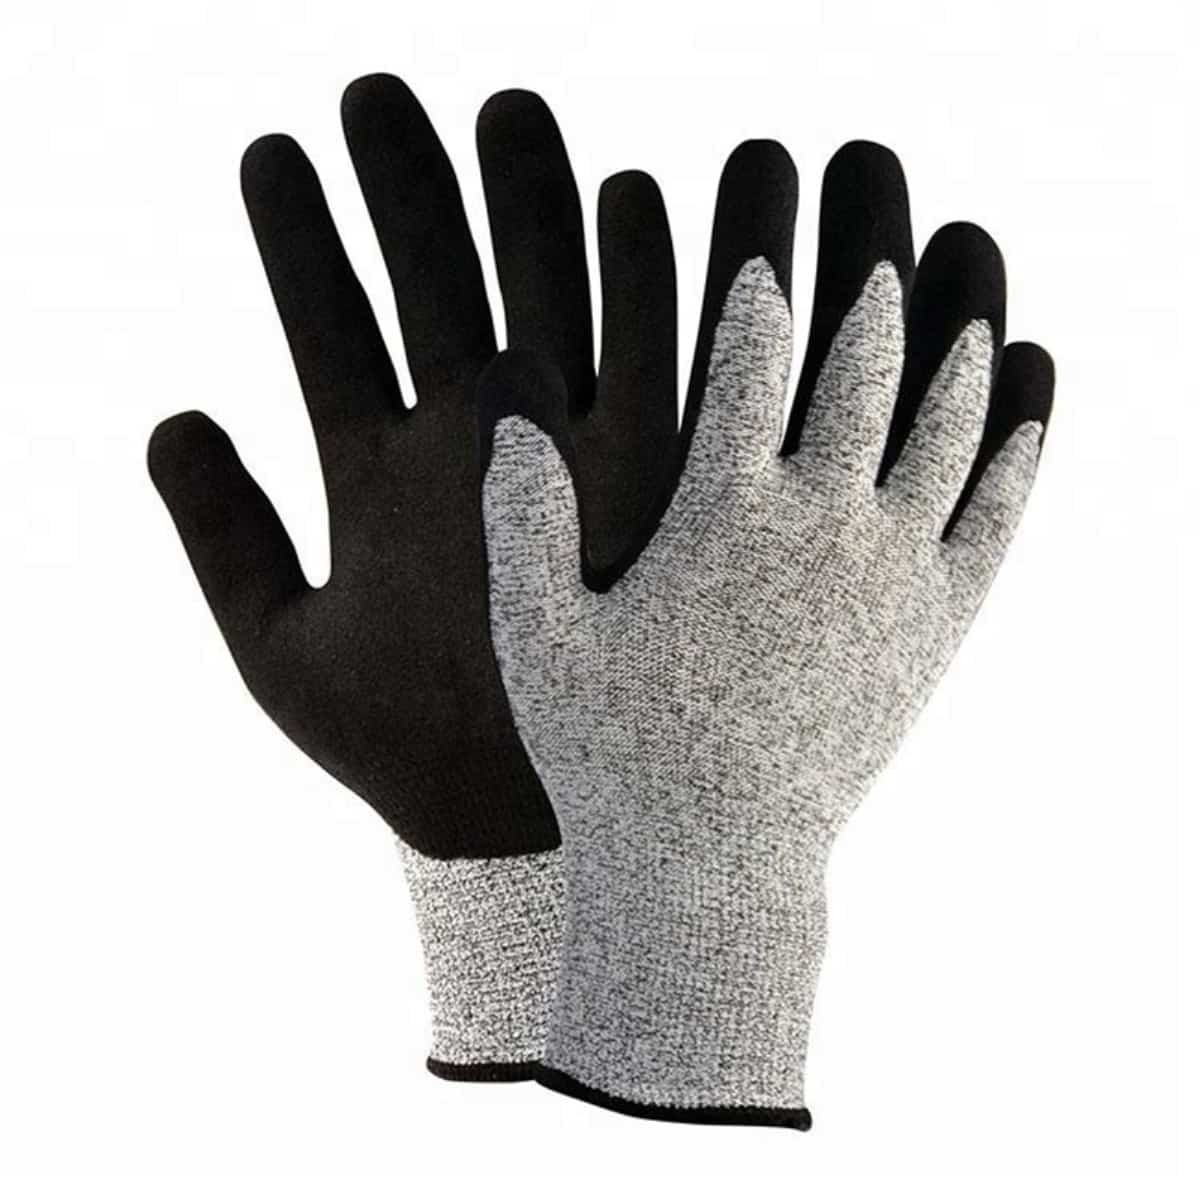 13g HPPE Industrial Cut Resistant Gloves na may Sandy Nitrile Coating Palm